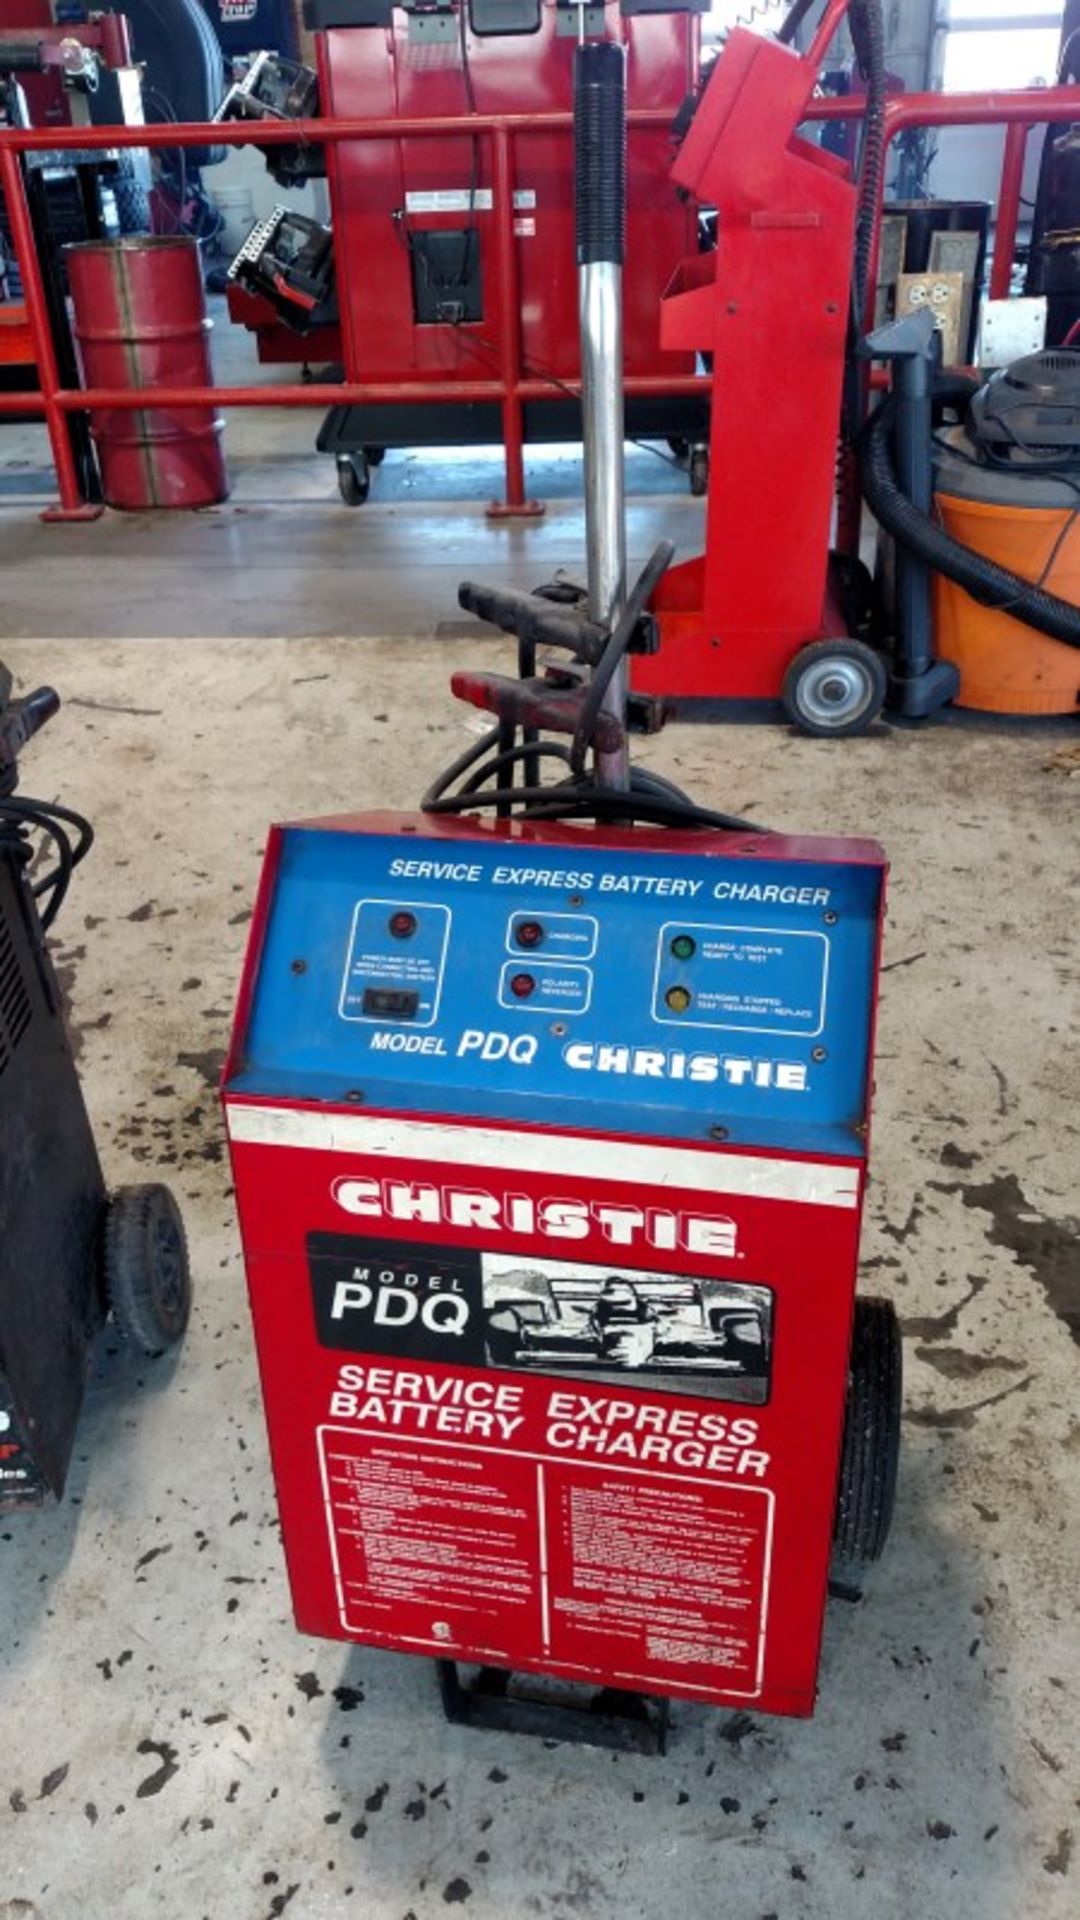 Christie PDQ Service Express Battery Charger